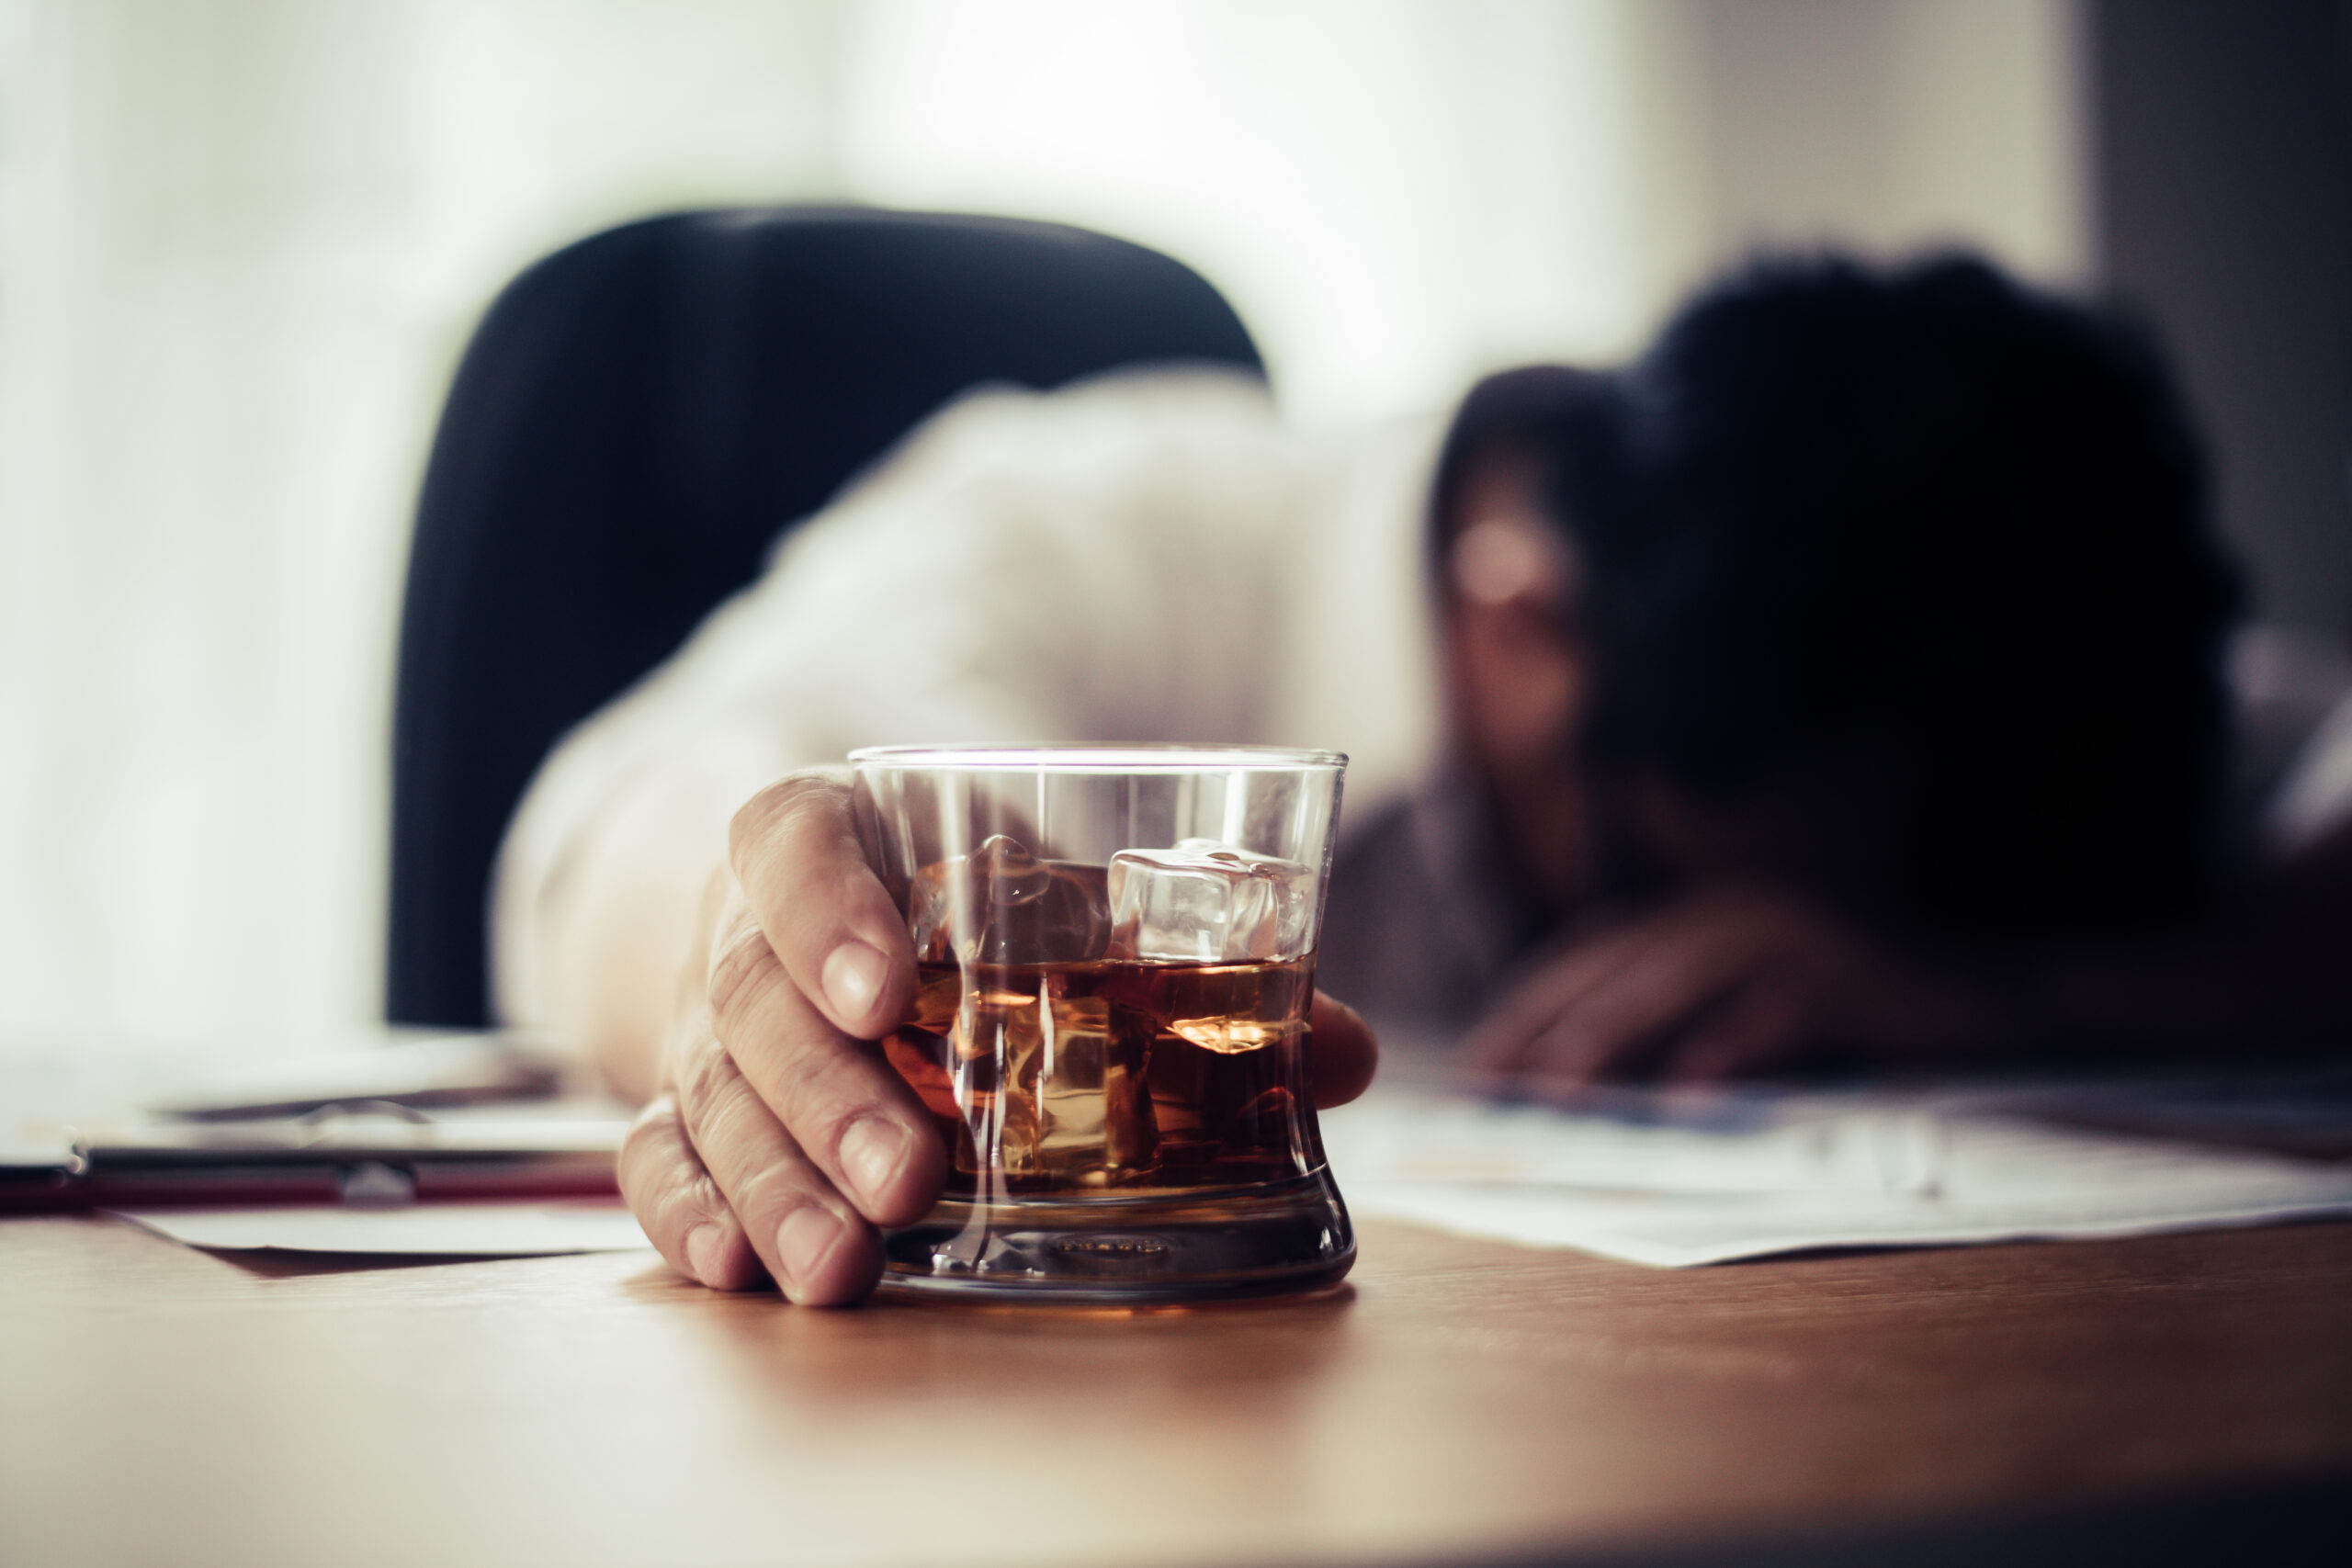 Drinking from stress at workplace and addiction